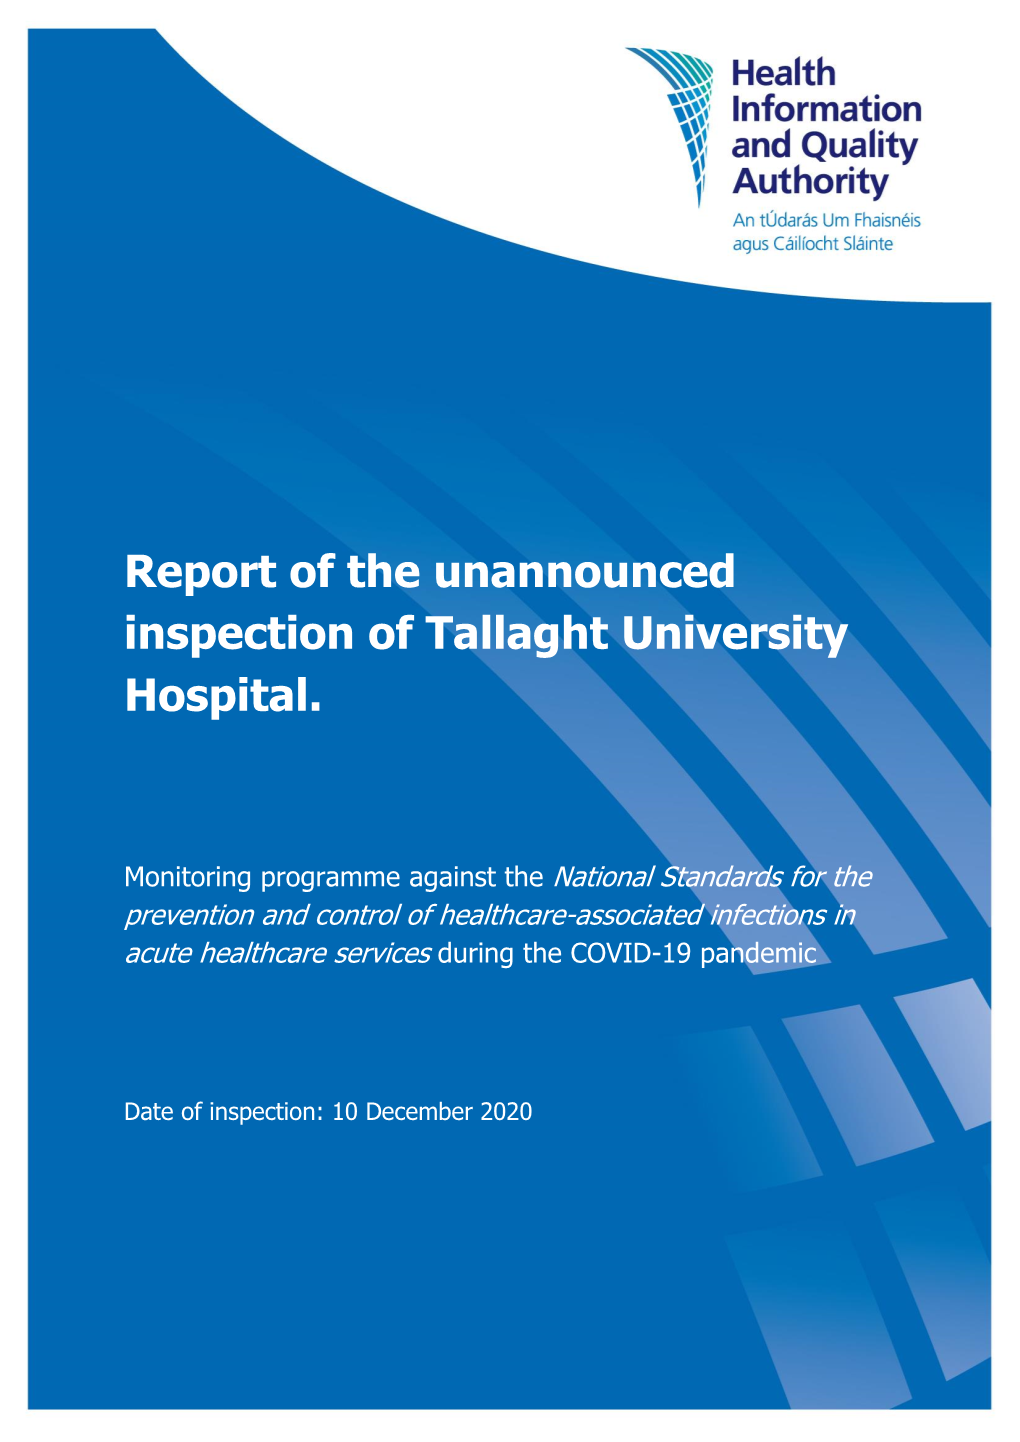 Report of Unannounced Inspection of Tallaght University Hospital 10 December 2020